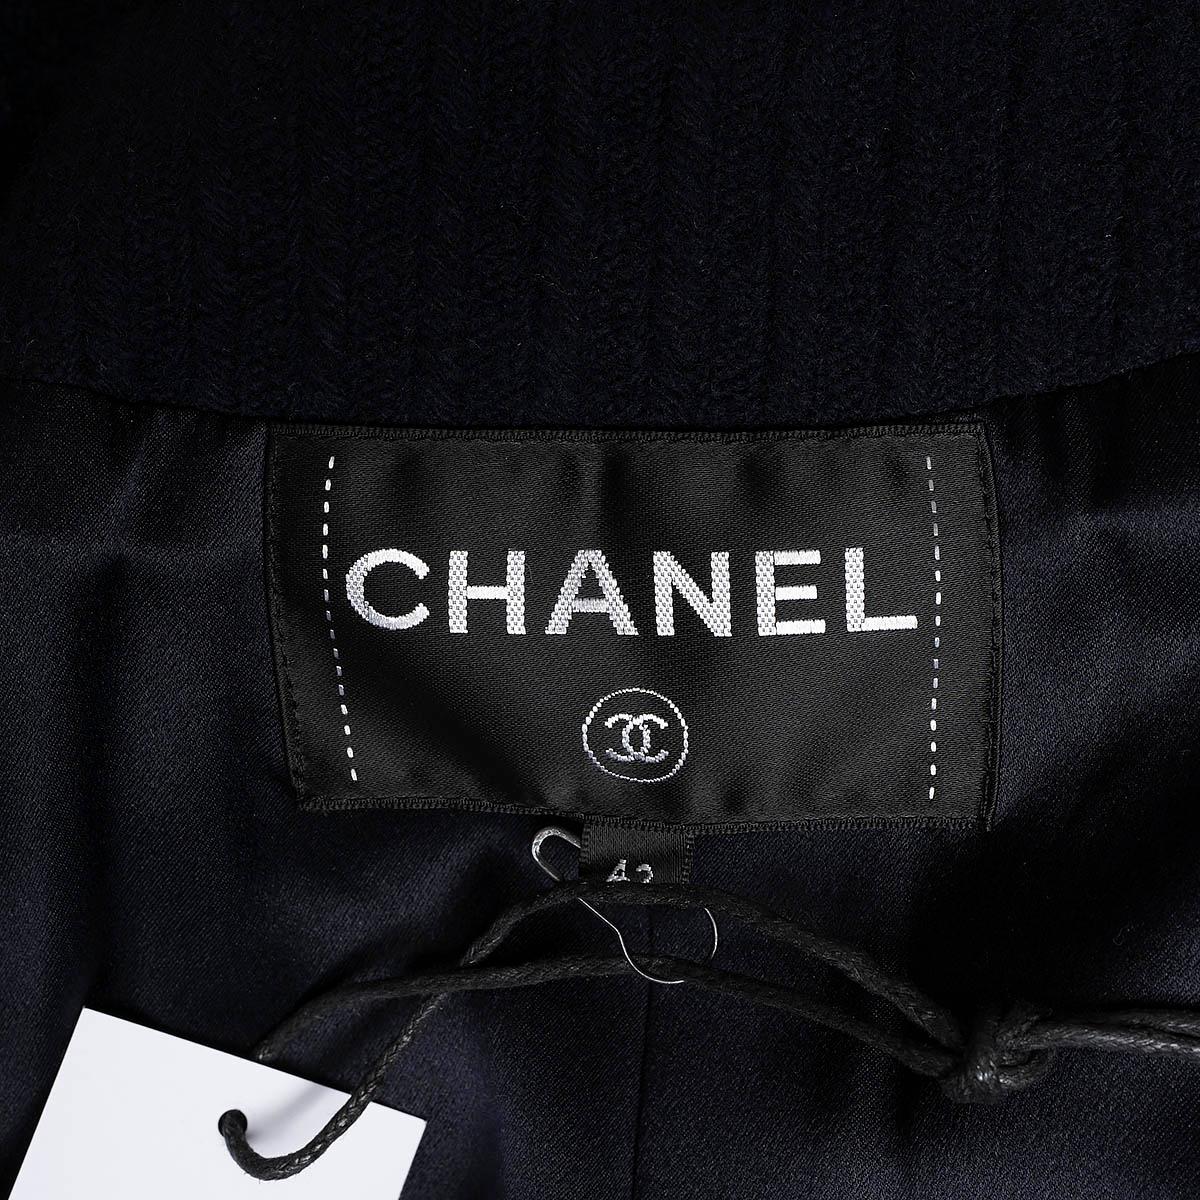 CHANEL navy blue wool 2018 18A HAMBURG DOUBLE BREASTED Coat Jacket 42 L For Sale 5